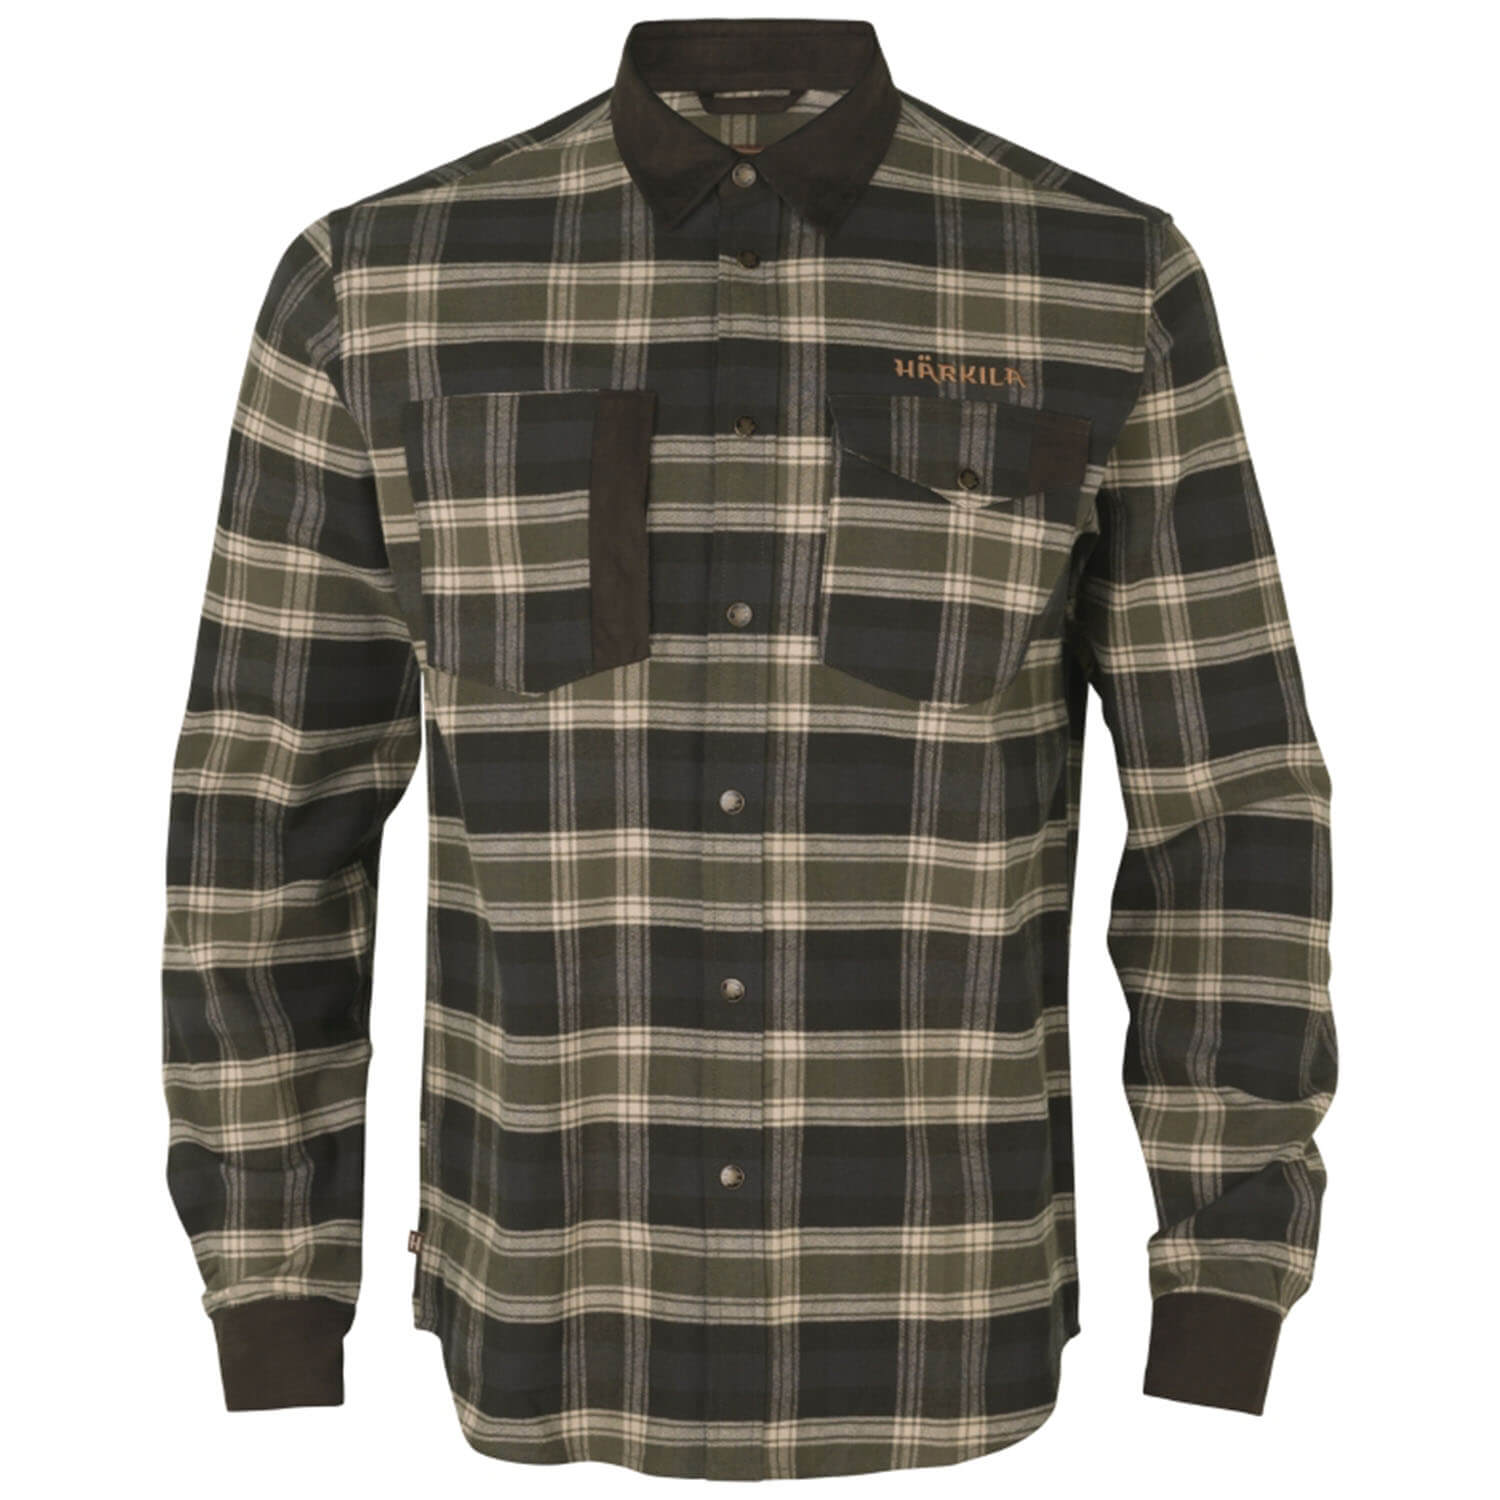 Härkila Shirt Aivak (olive) - Gifts For Hunters